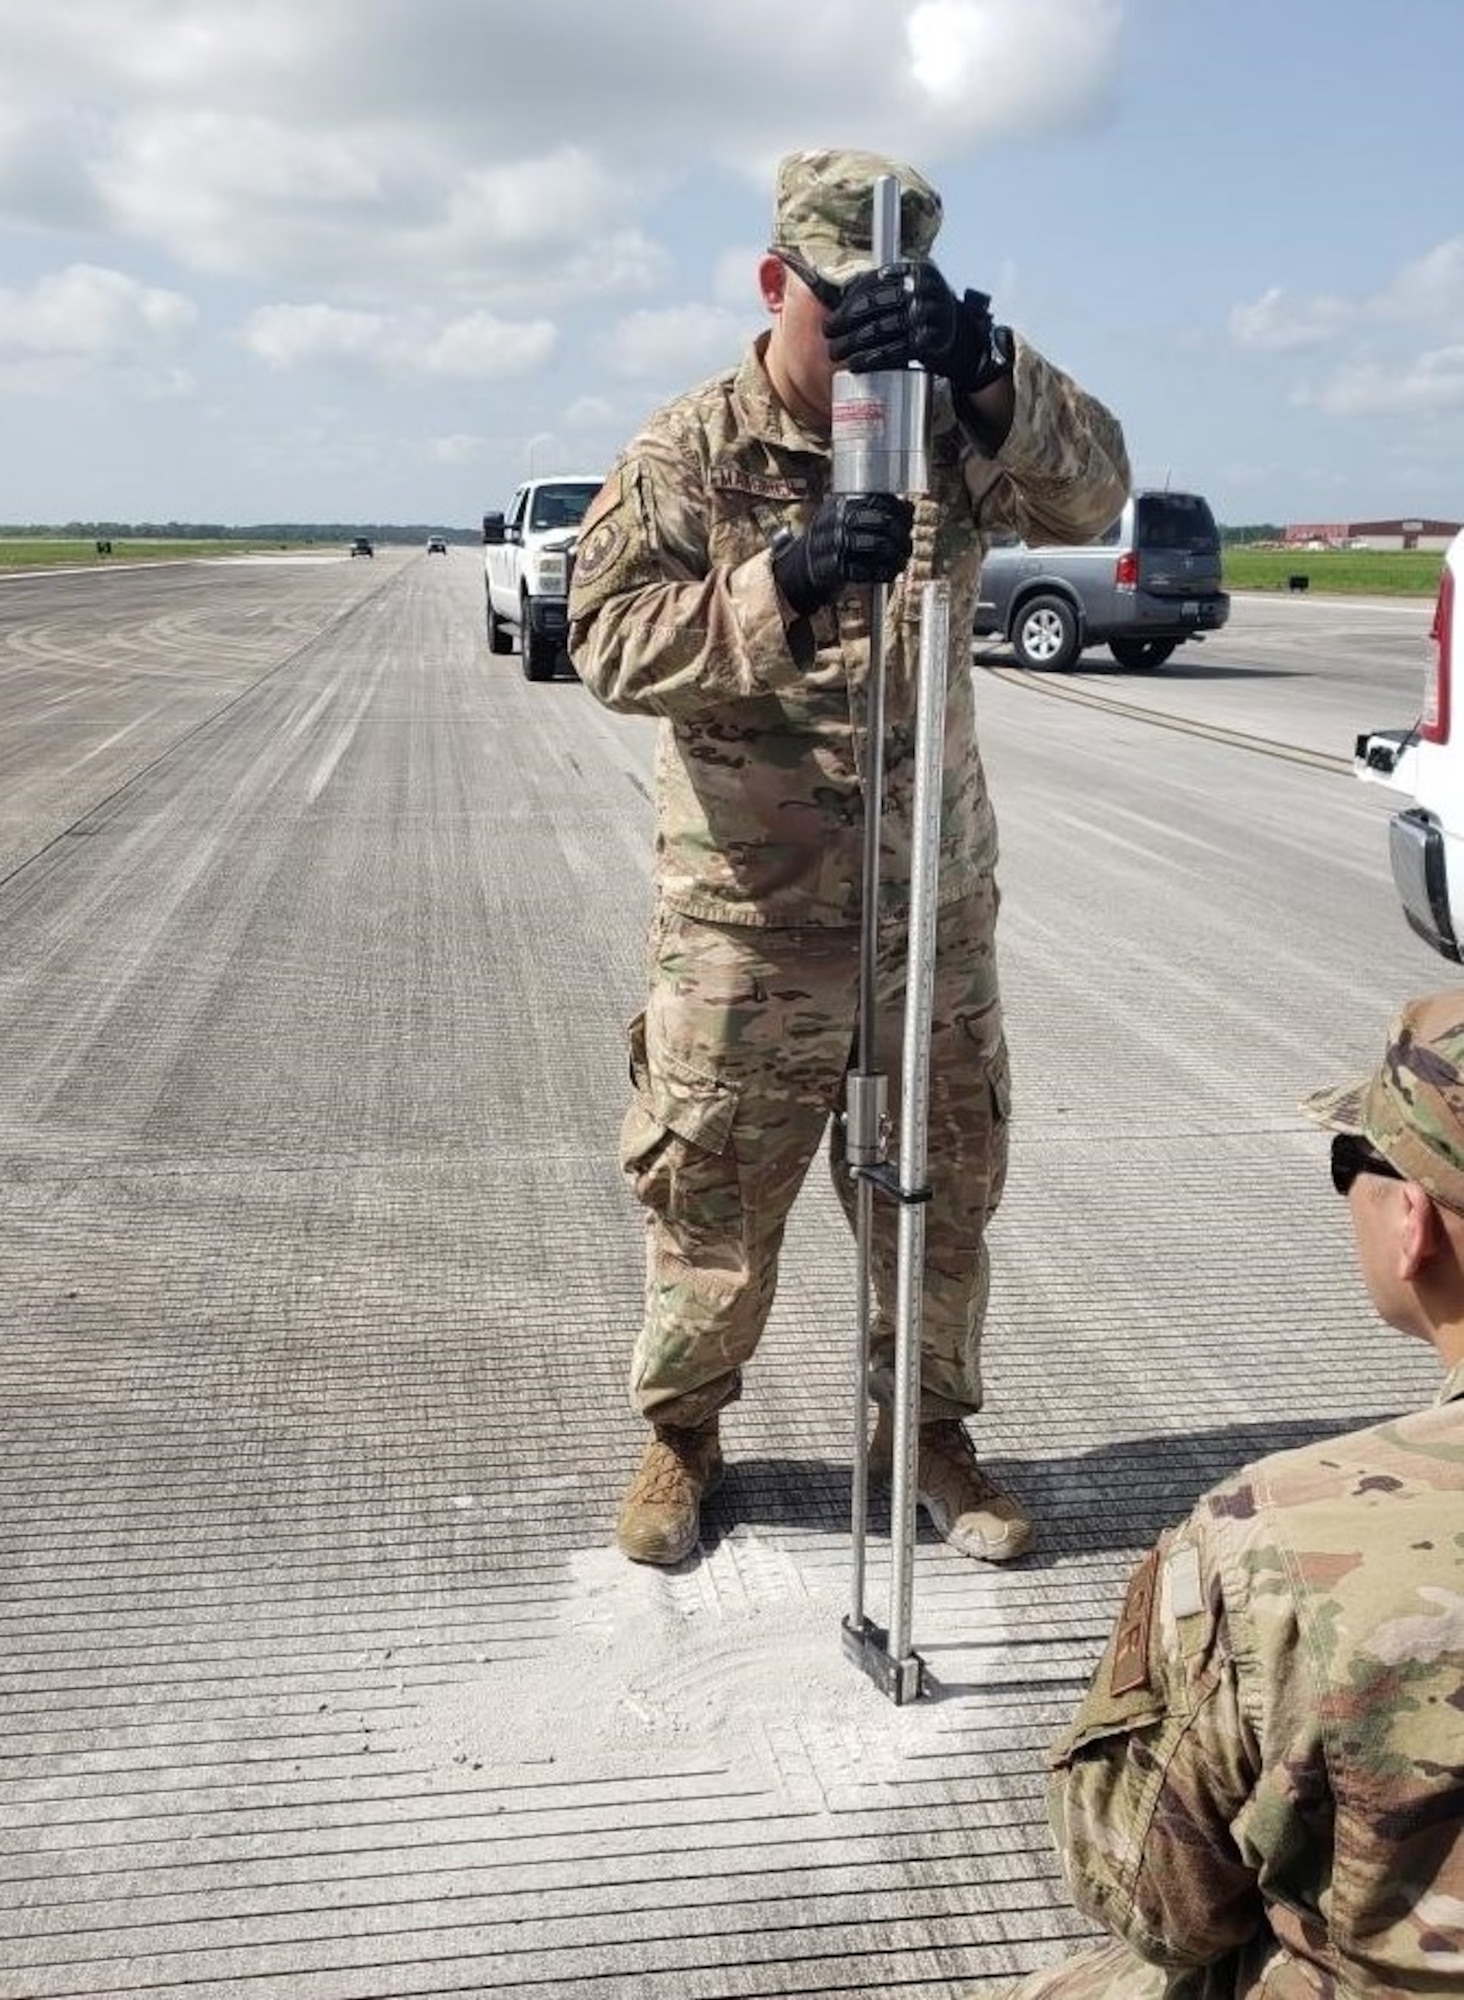 Maj. Zack Mangrich, 621st Mobility Support Operations Squadron air mobility liaison officer, performs a dynamic cone penetrometer test at Houma-Terrebonne Airport, Louisiana, July 11, 2020. Mangrich is part of an airfield assessment team tasked by Air Mobility Command to help the Defense Support for Civil Authorities prepare for hurricane season. (U.S. Air Force photo by Tech. Sgt. Luther Mitchell Jr)